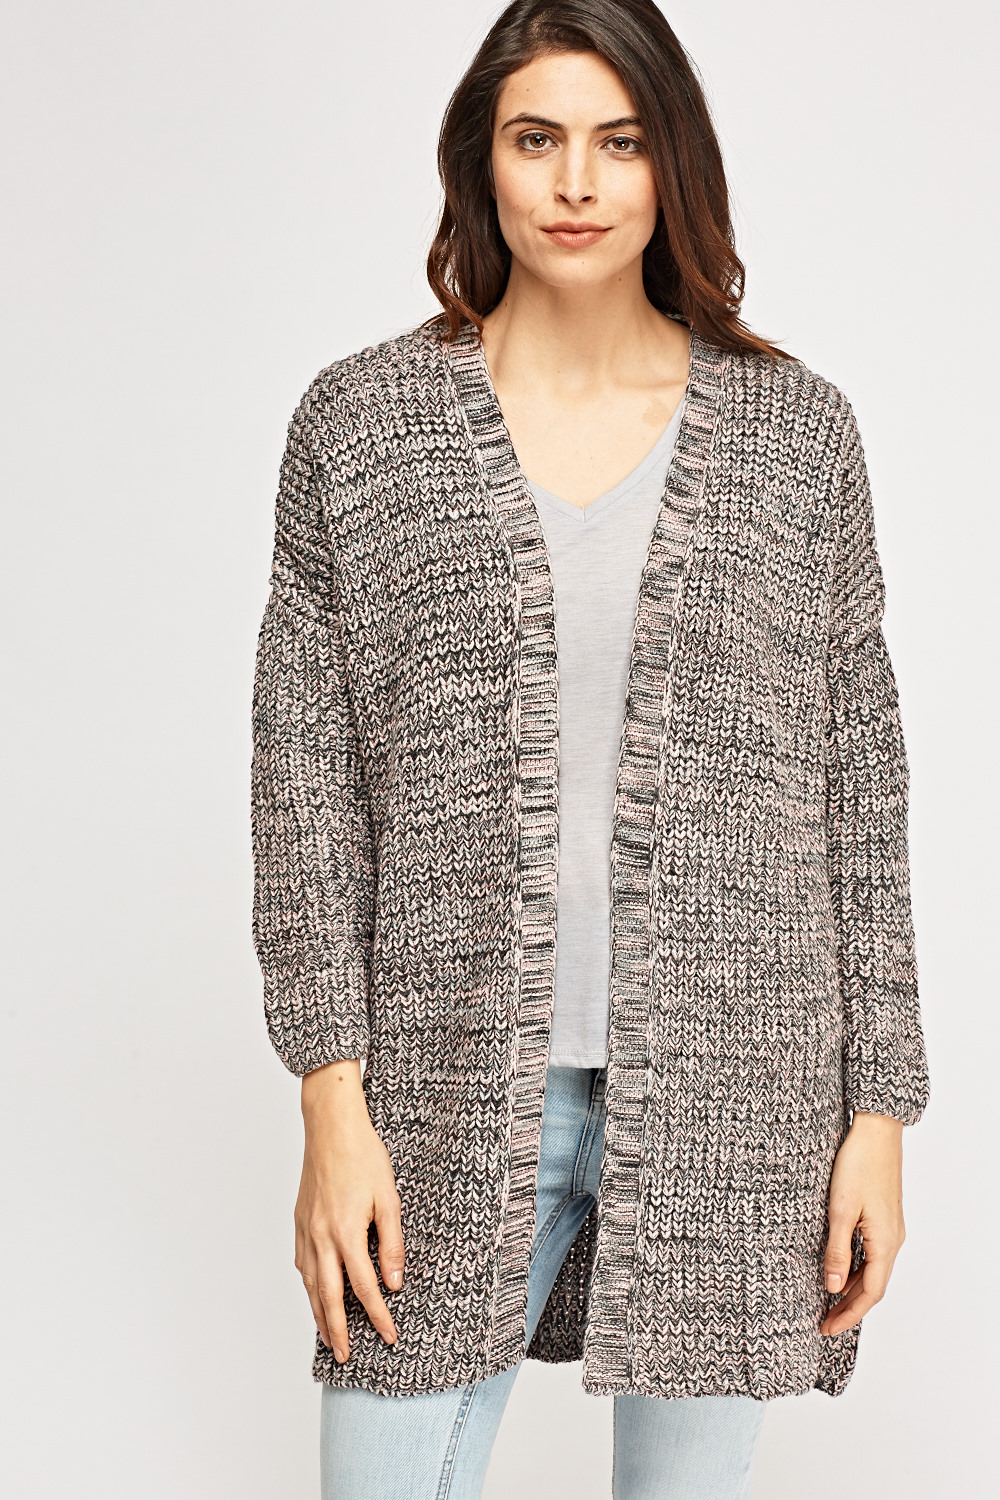 Honey Knitted Back Cardigan - Just $4